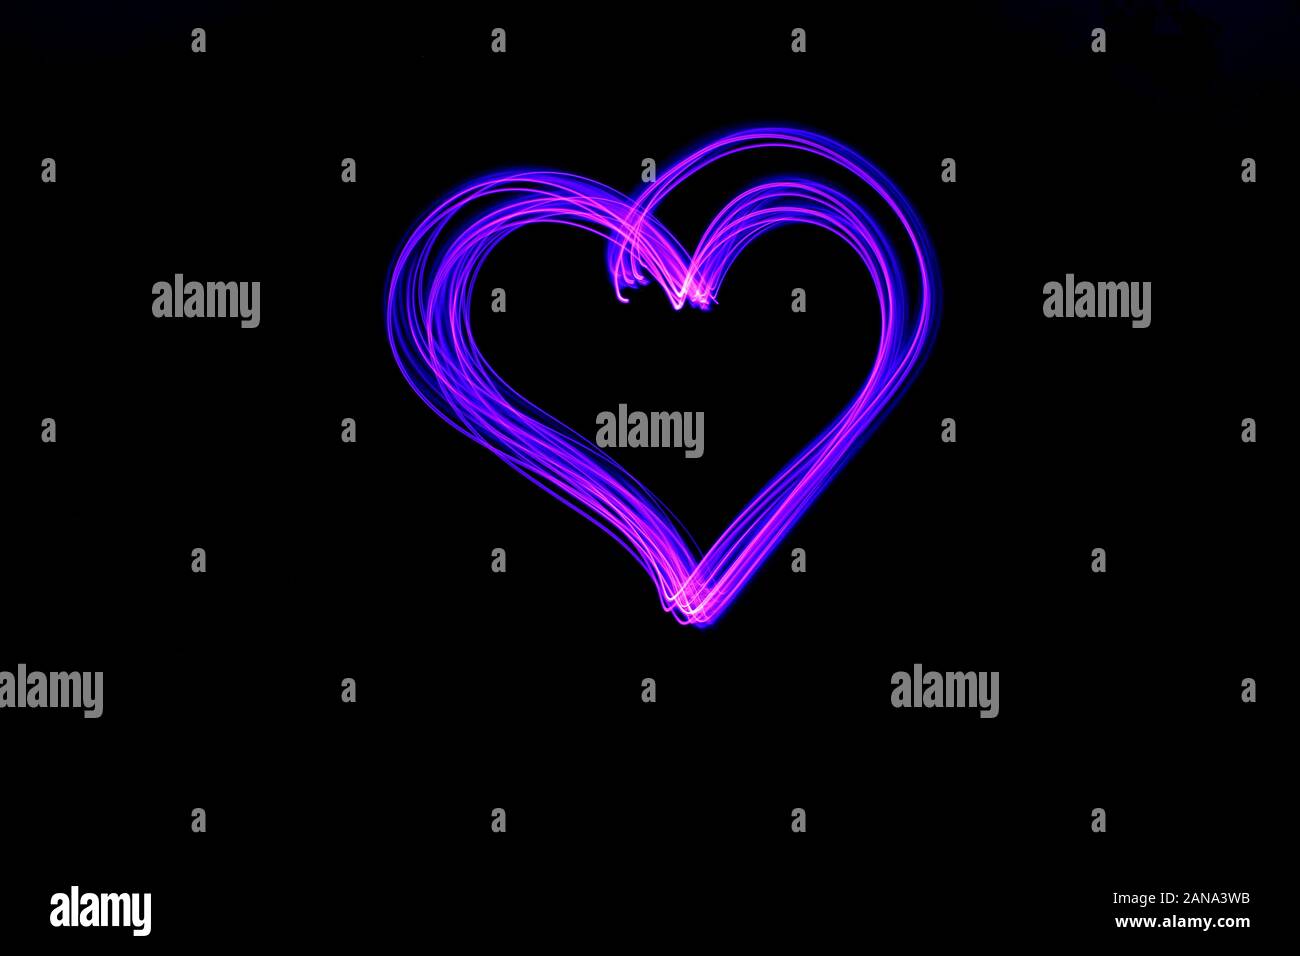 Long exposure light painting, vibrant color in a heart shape symbol abstract swirl against a clean black background.  Light painting photography. Stock Photo